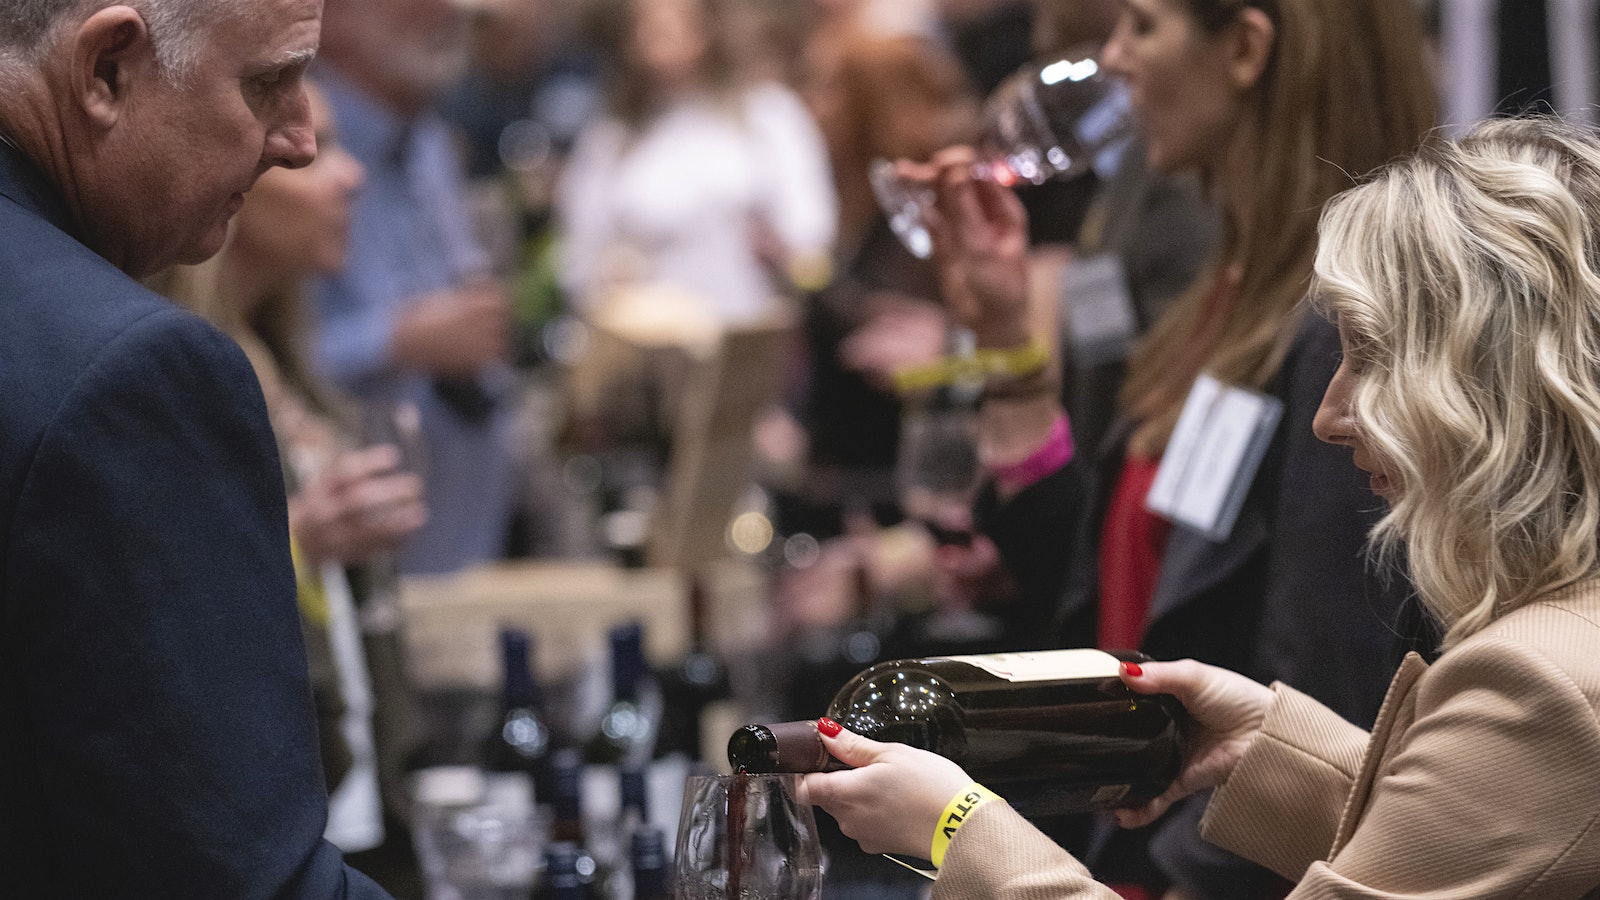 More than 1,000 attendees enjoyed more than 200 wines from around the world, all rated 90 points or higher]